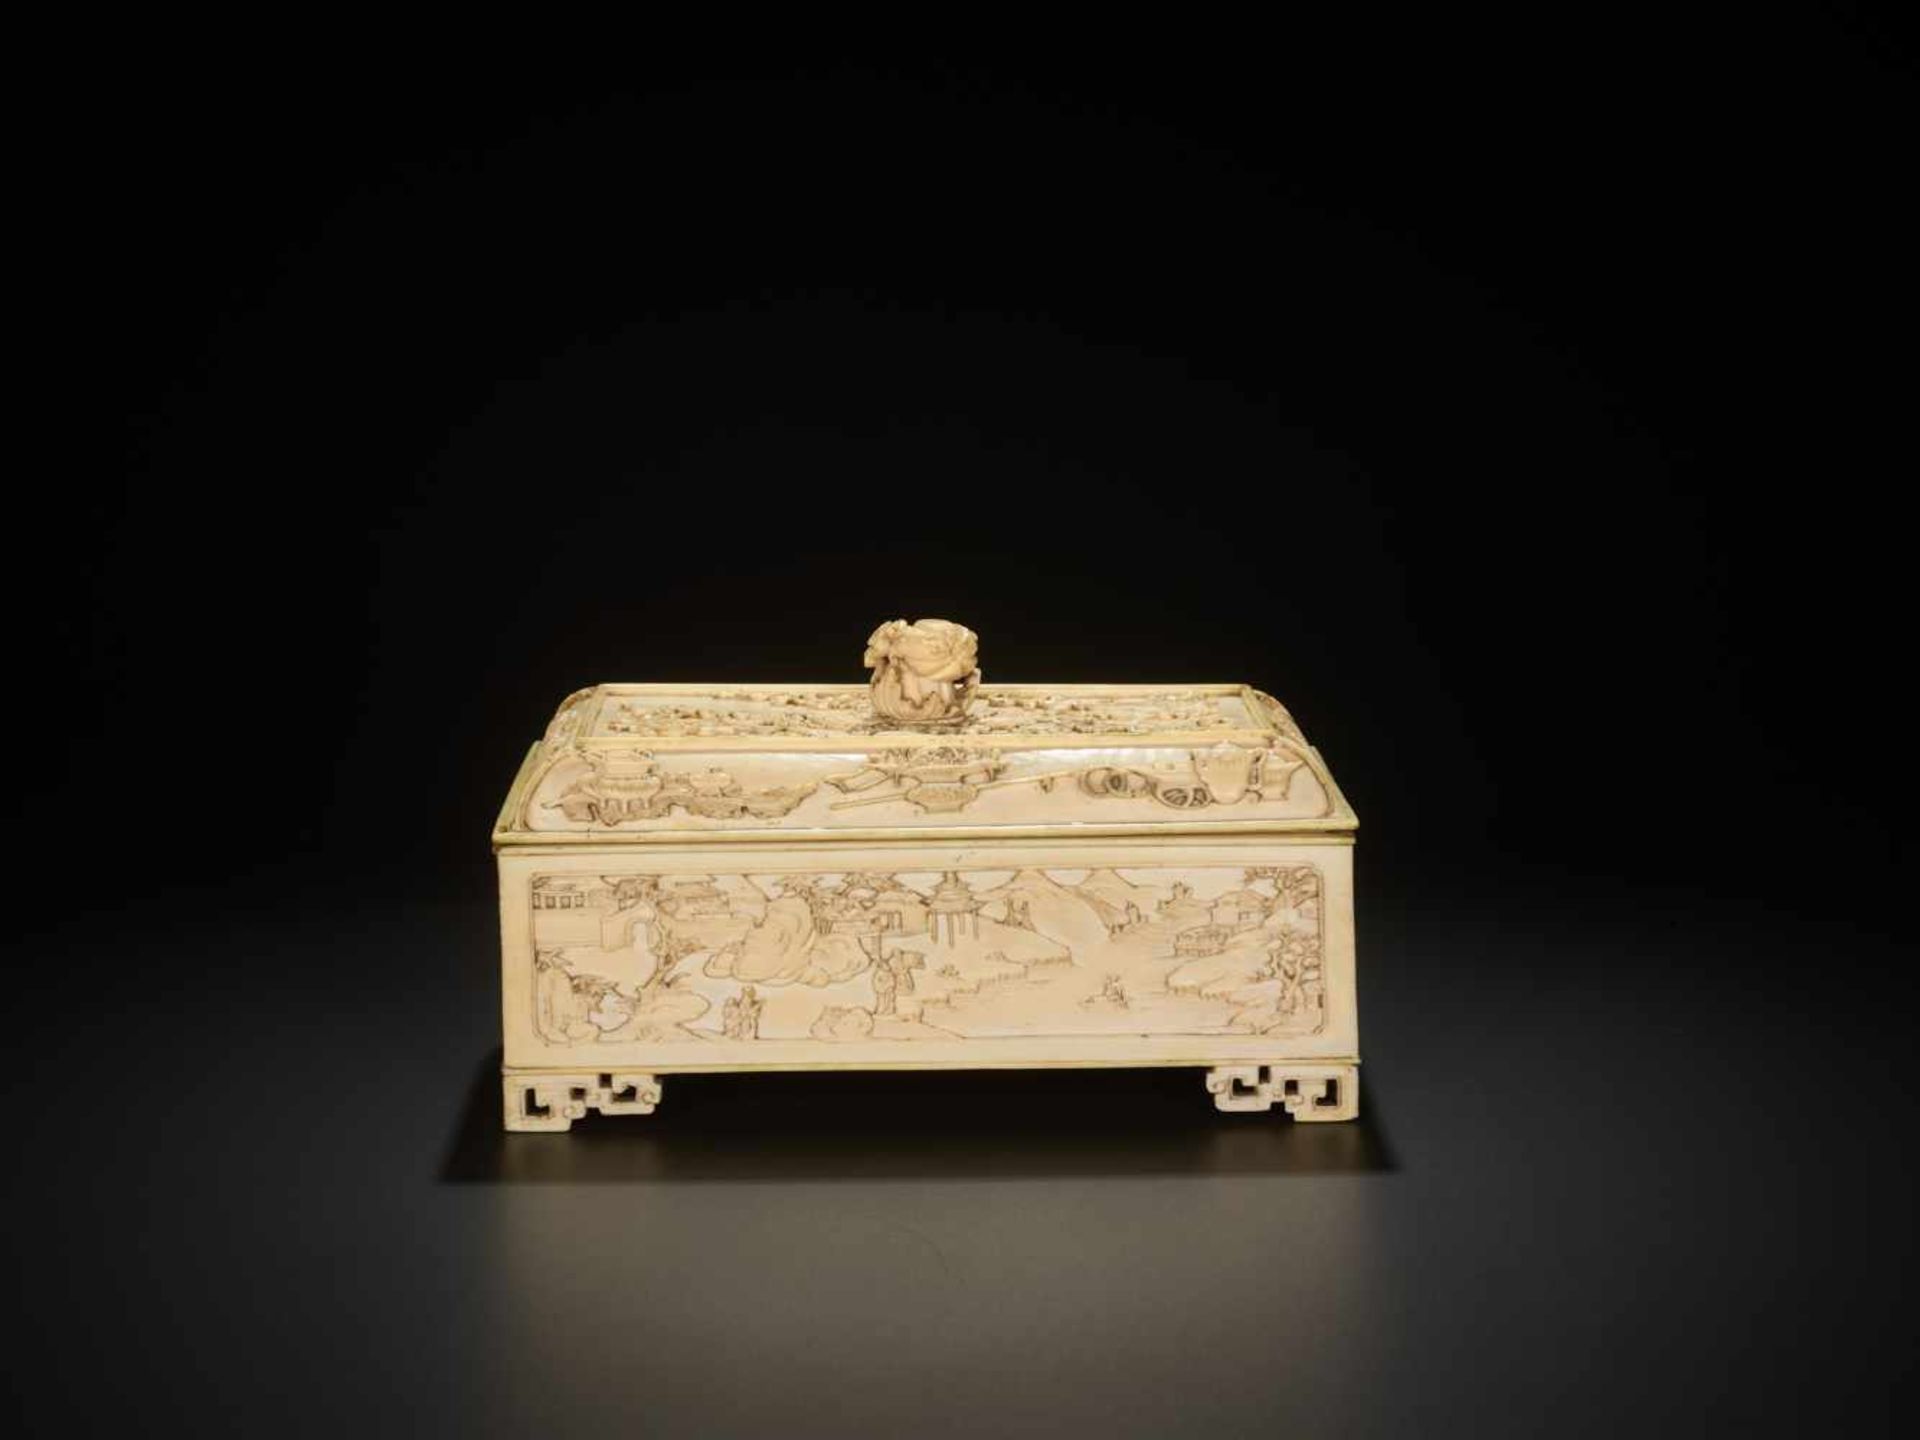 A RARE CANTONESE IVORY BOX WITH COVER, EARLY 19th CENTURY Ivory, wooden inset with marble paper - Image 3 of 7